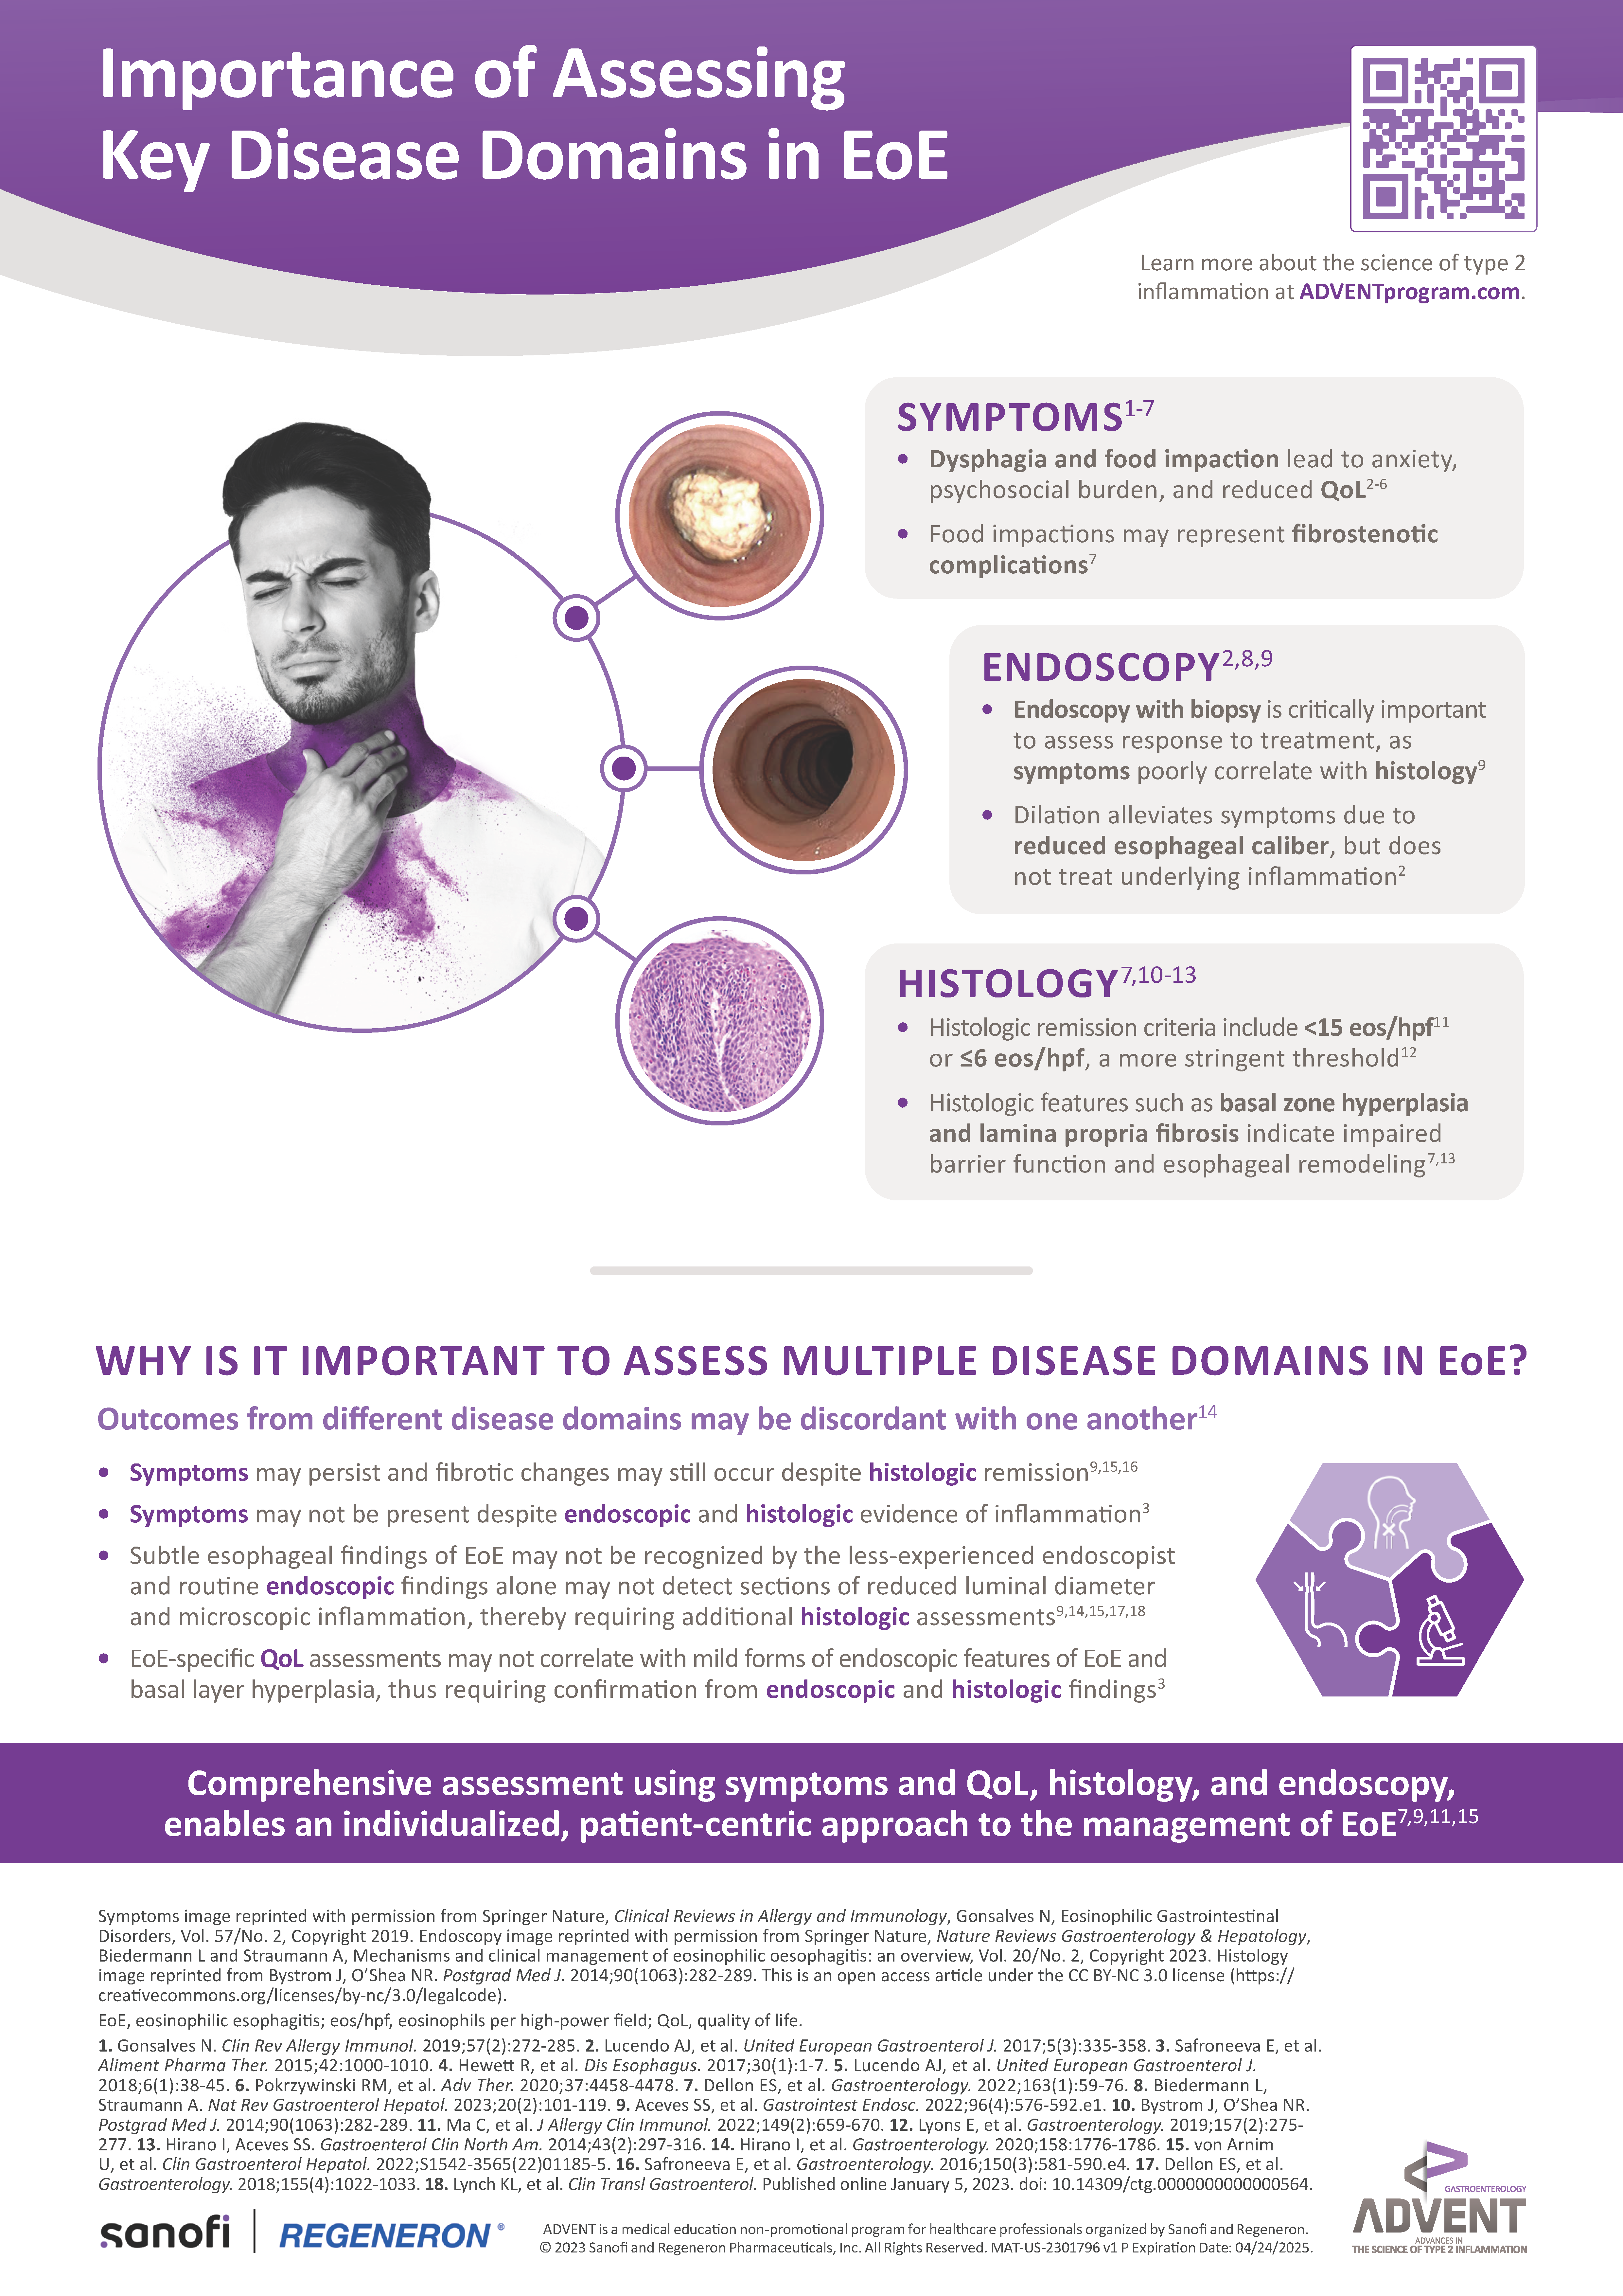 Importance of Assessing Key Disease Domains in EoE Infographic